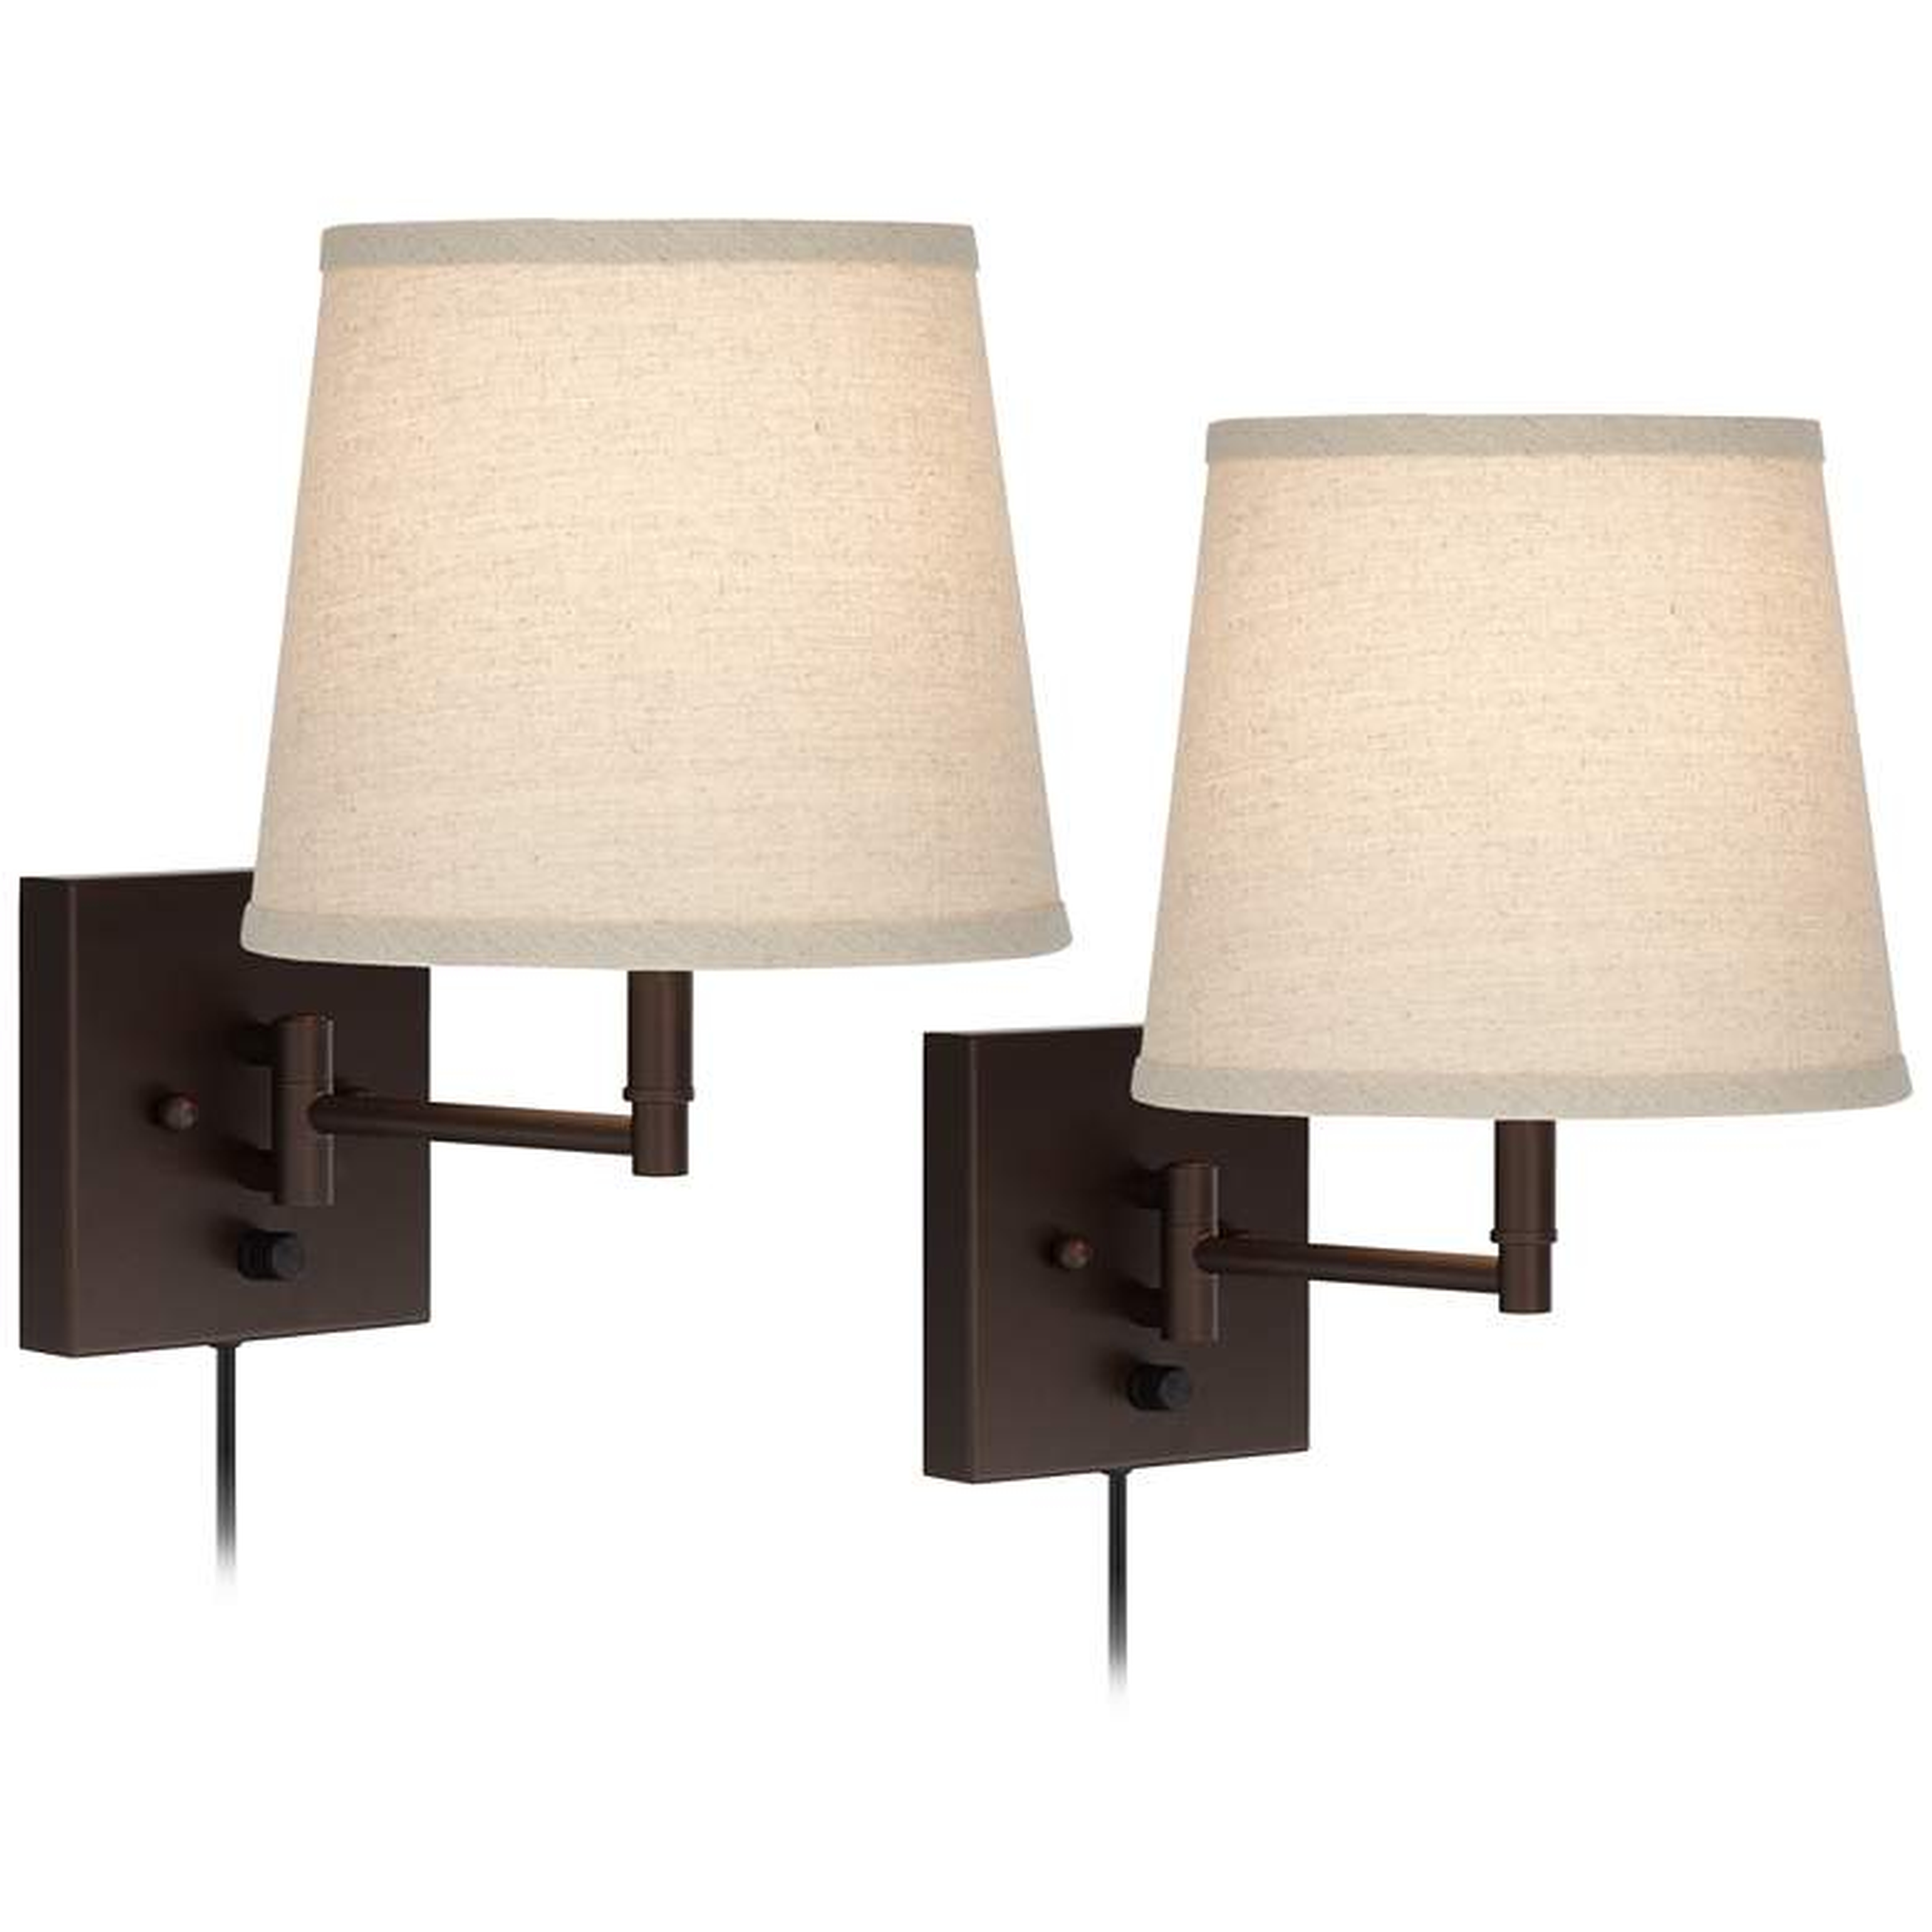 Lanett Painted Bronze Plug-In Swing Arm Wall Lamp Set of 2 - Style # 46T02 - Lamps Plus